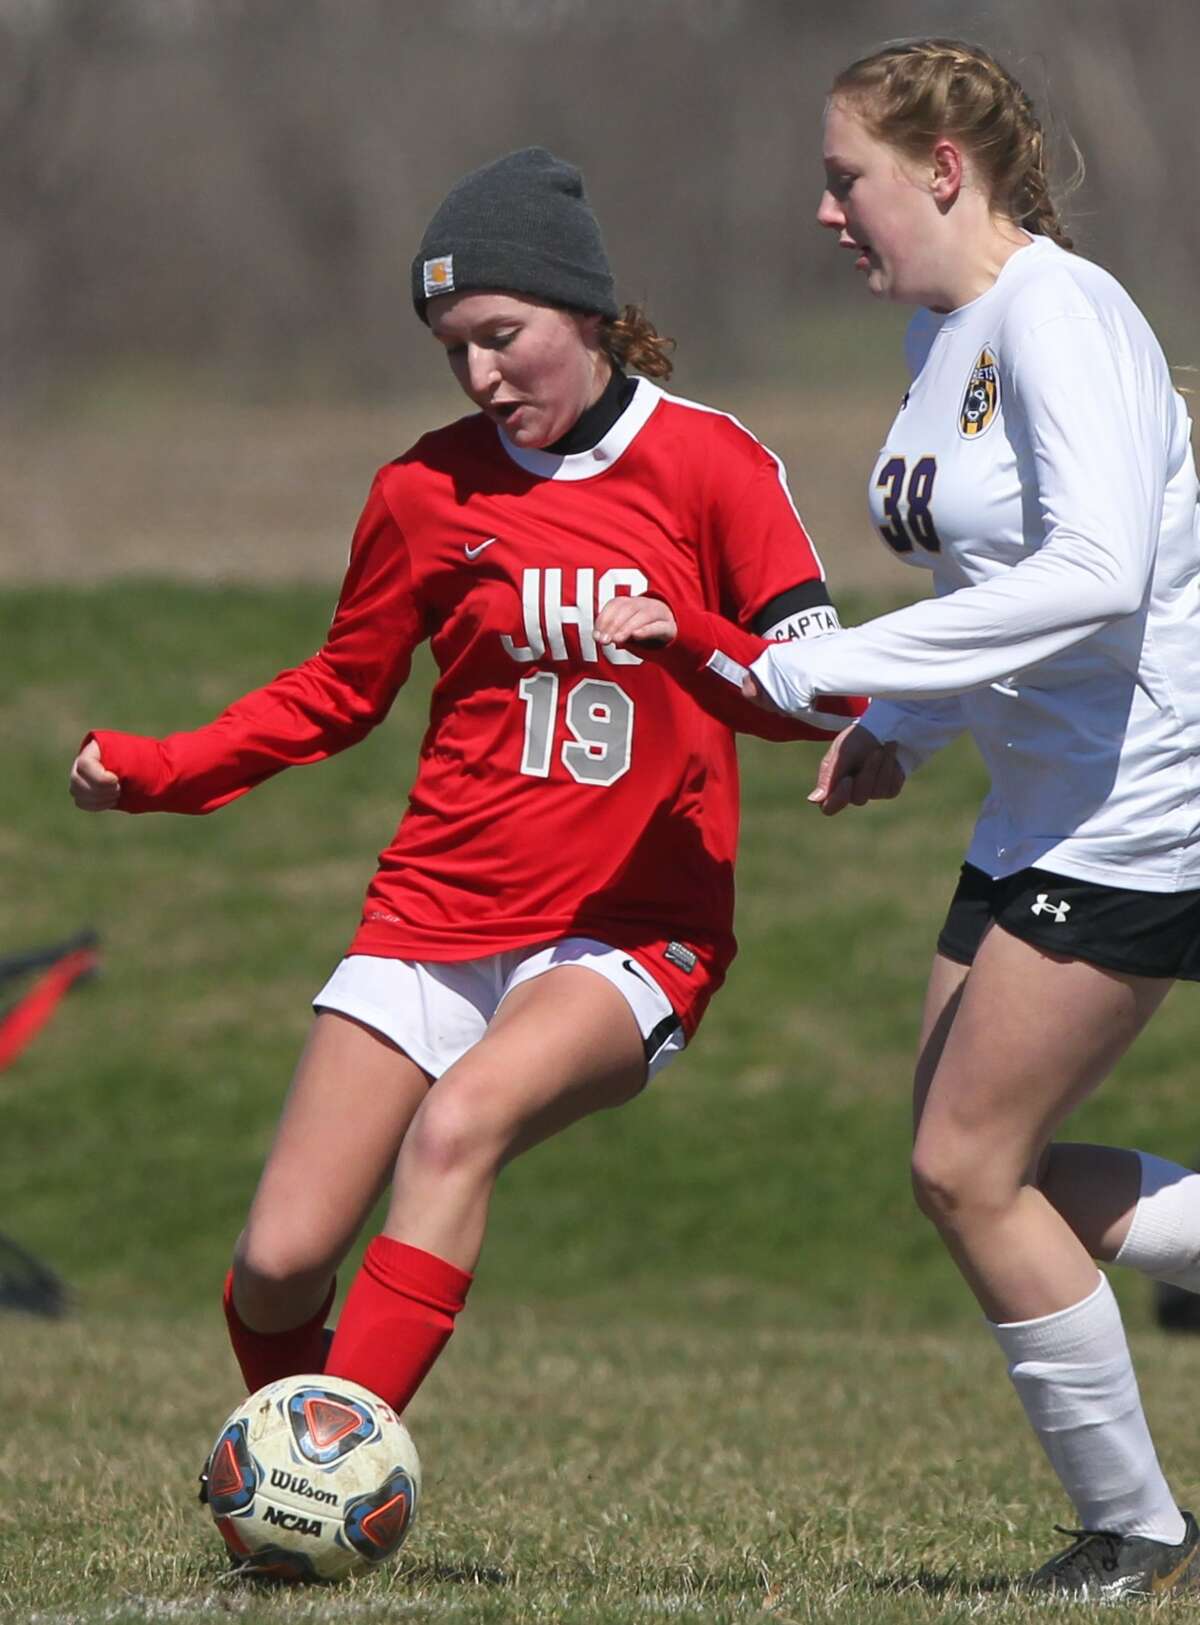 Jacksonville's Norah Pevey passes the ball during a girls' soccer game against Williamsville on Saturday.